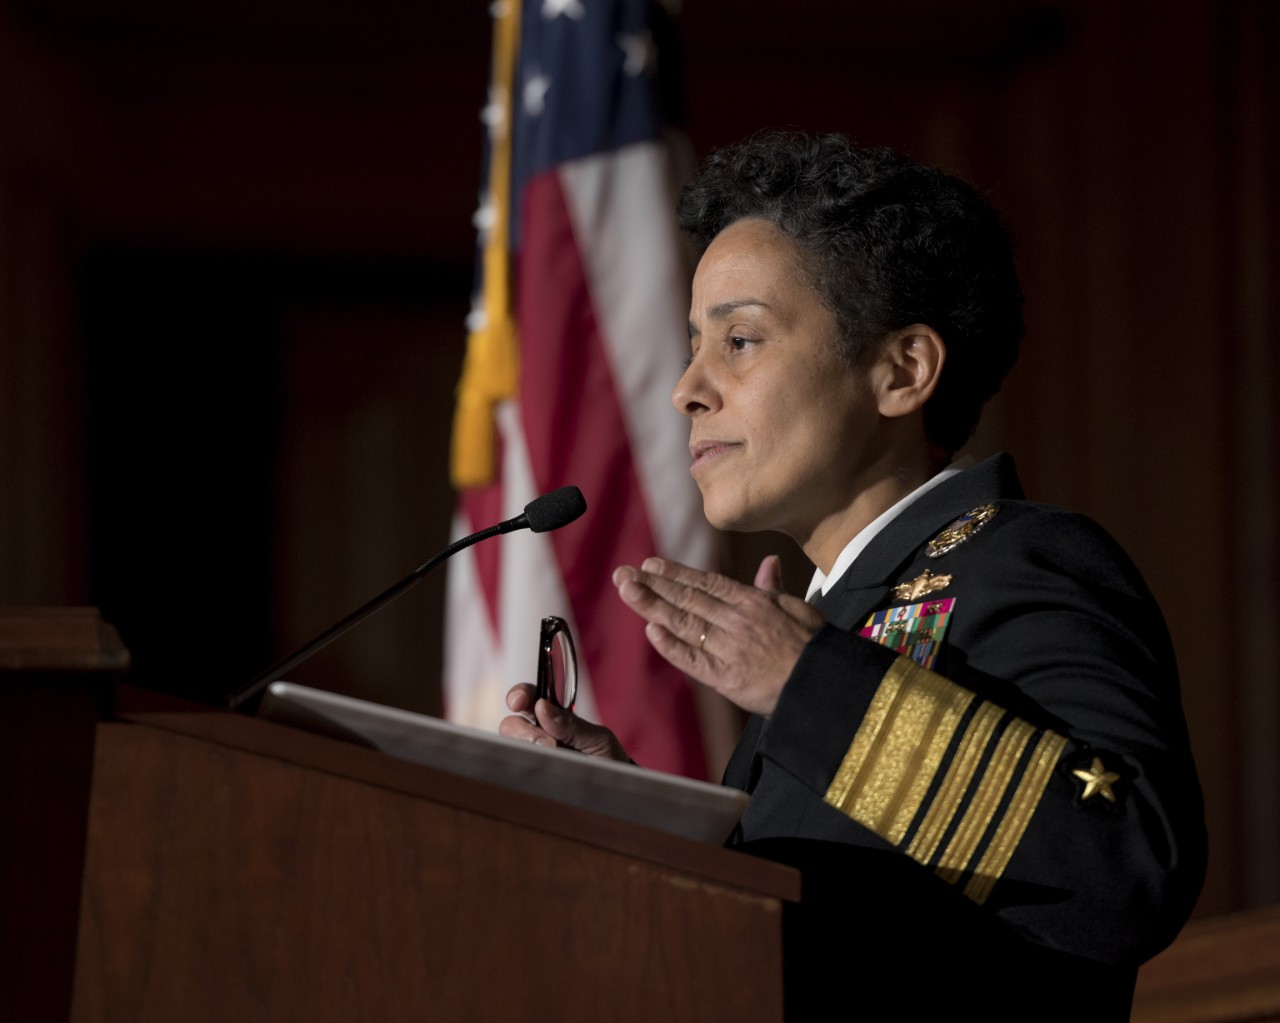 412-APD-1330-2014-1106:  Admiral Michele J. Howard, 2014.  Admiral Howard speaking at a Veteran’s Day event.   Photographed on November 6, 2014.  Official Environmental Protection Agency photograph, now in the collections of the National Archives. 